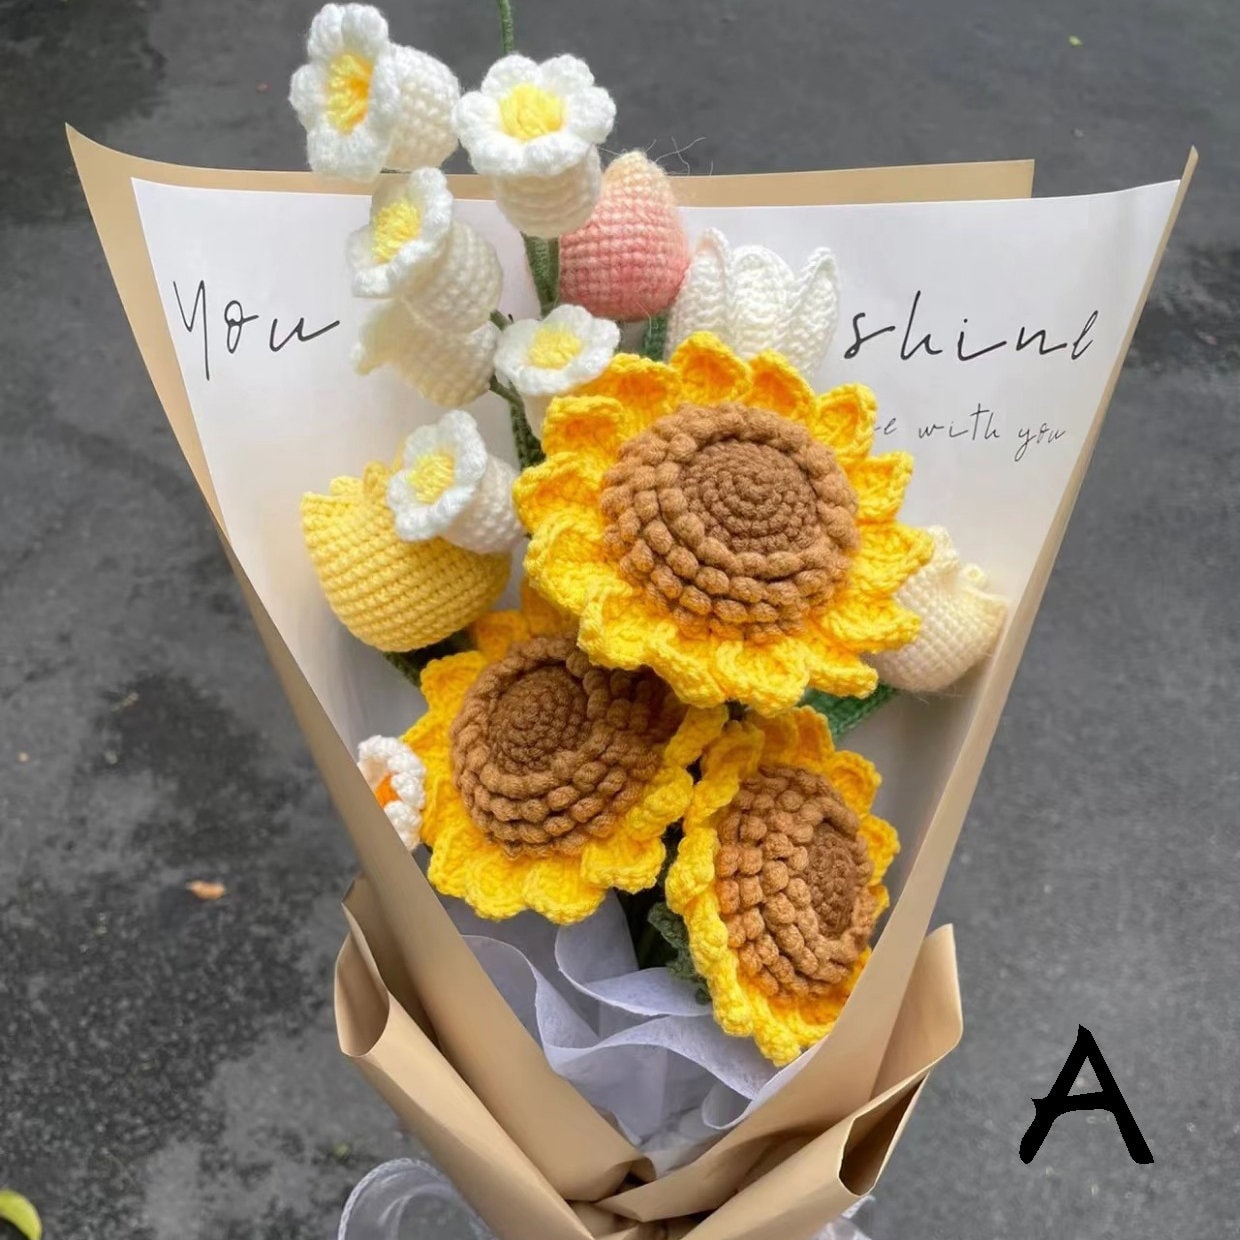 Crochet Sunflower Bouquet - Handmade Knitted Sunflowers-Tulip Rose Finished Flowers-Gifts for her